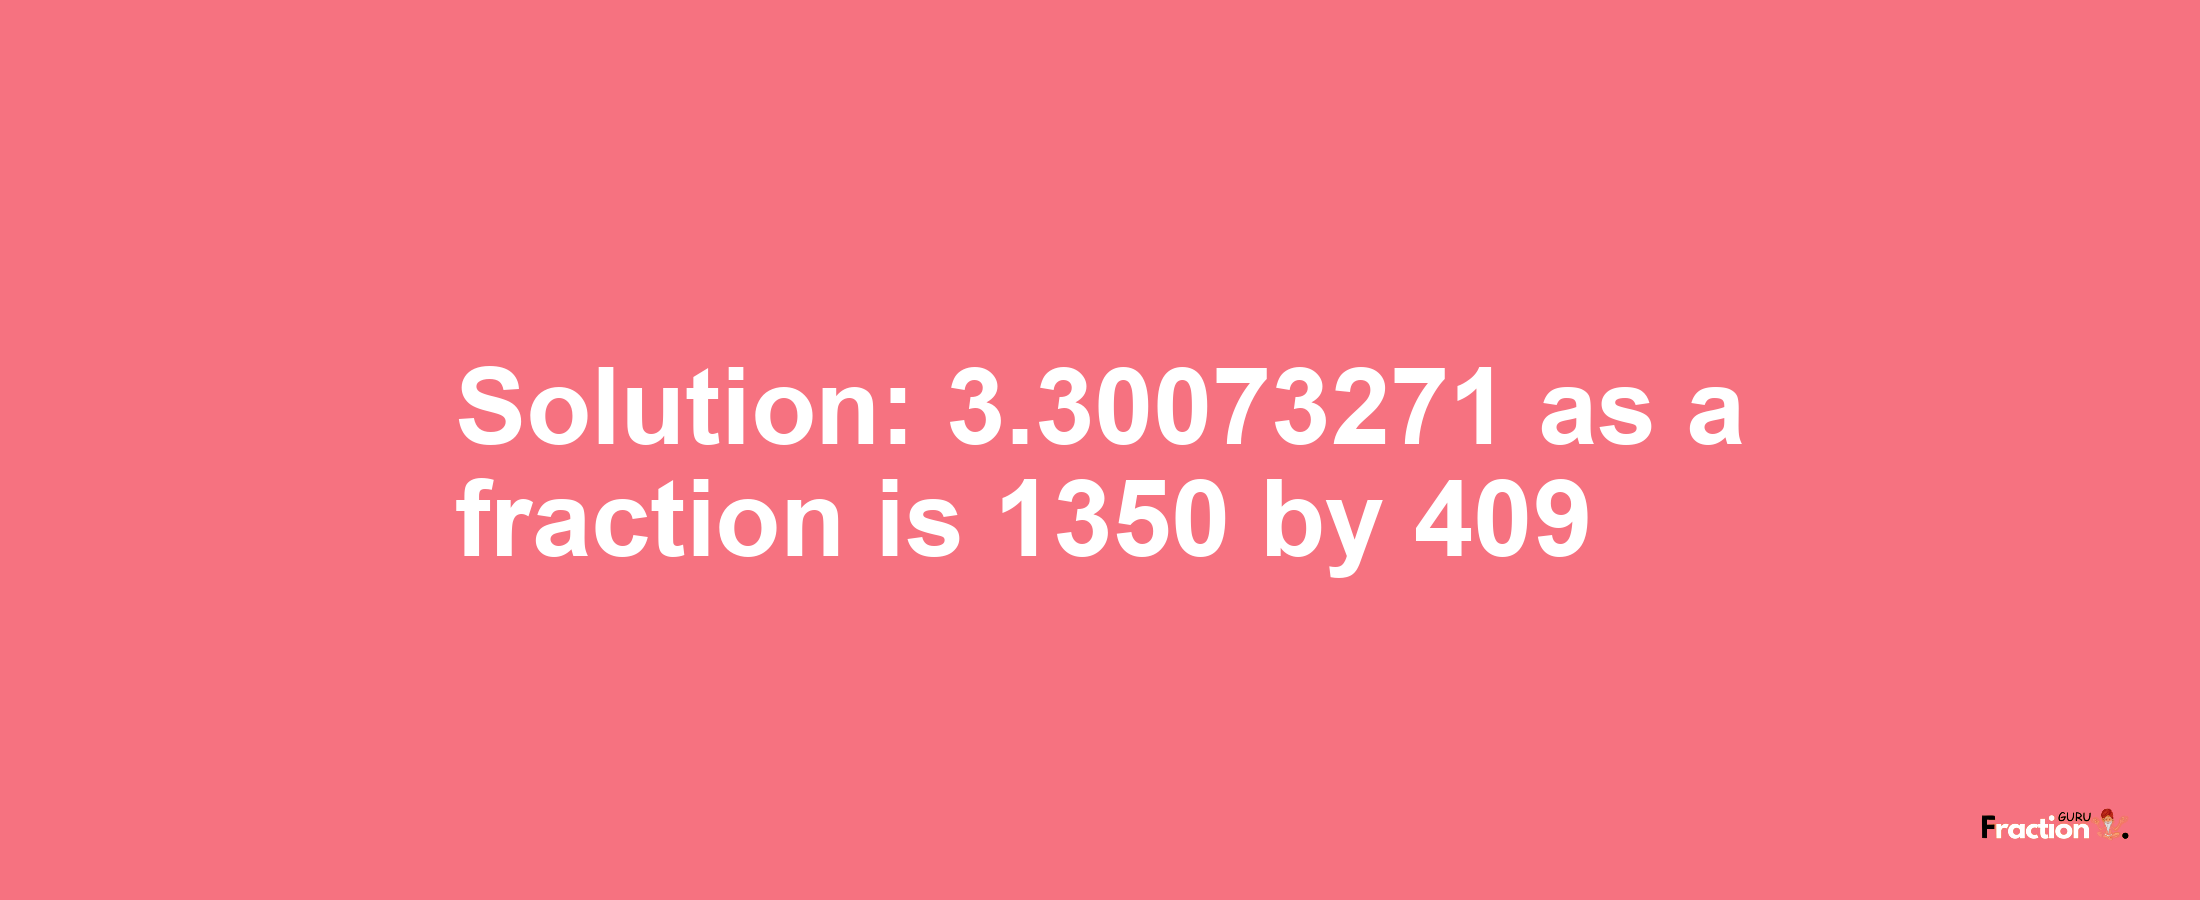 Solution:3.30073271 as a fraction is 1350/409